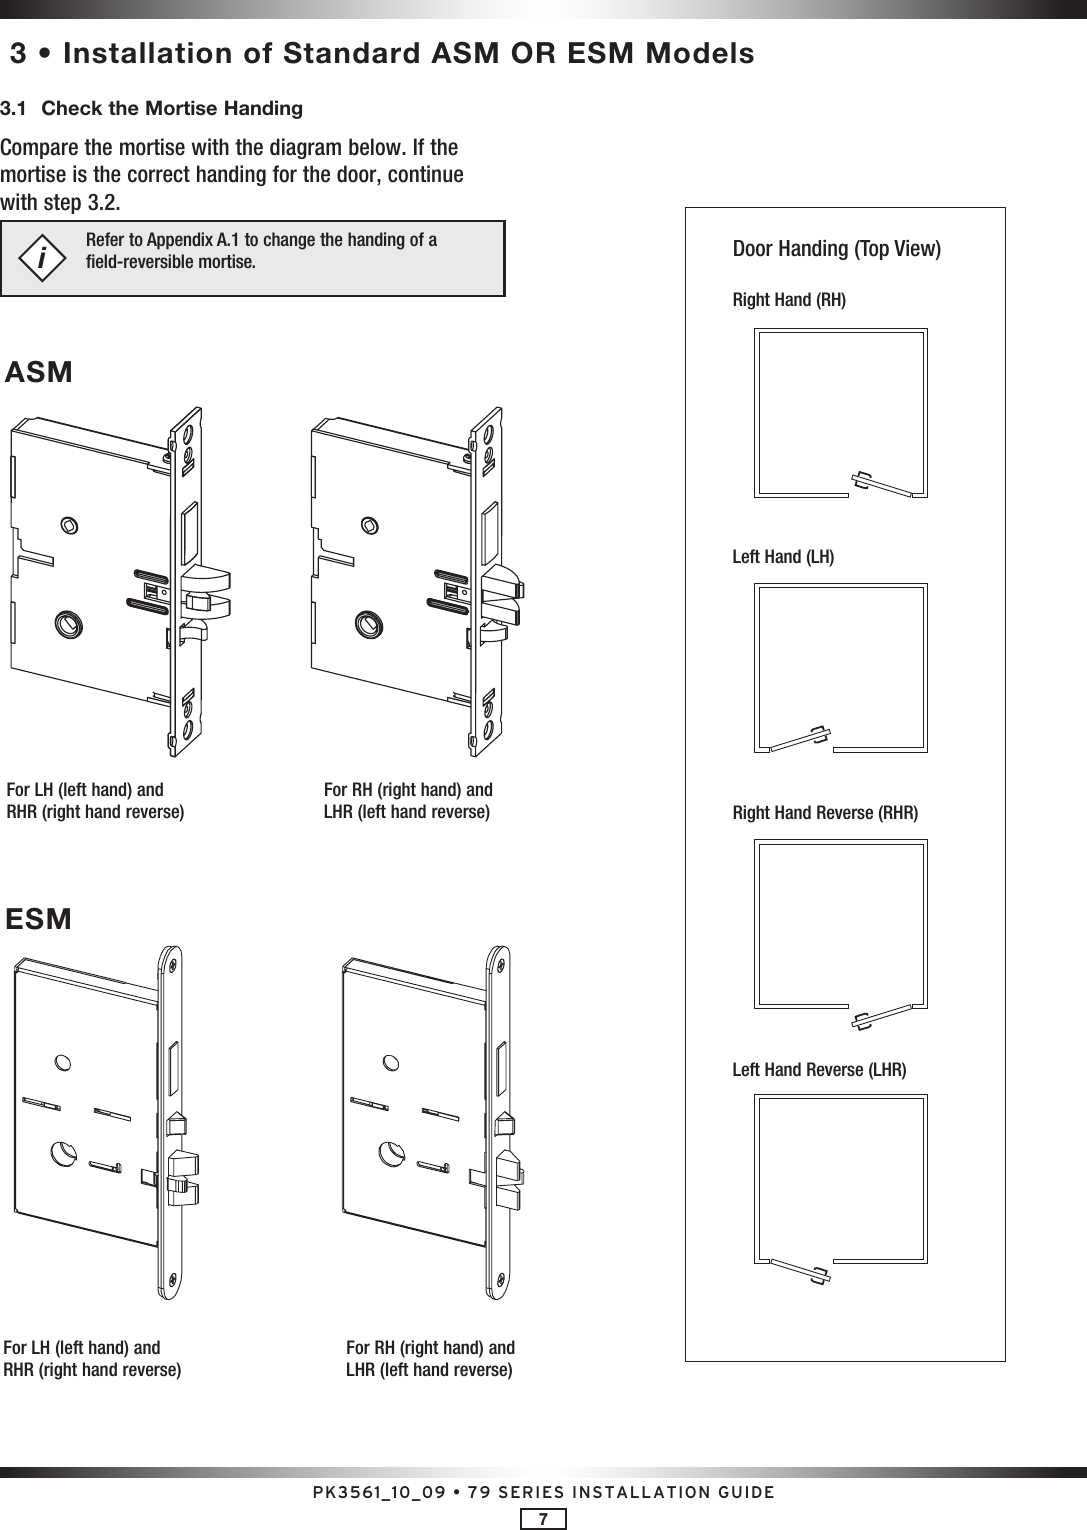 PK3561_10_09 • 79 SERIES INSTALLATION GUIDE7 3 • Installation of Standard ASM OR ESM Models3.1  Check the Mortise HandingCompare the mortise with the diagram below. If the mortise is the correct handing for the door, continue with step 3.2.Refer to Appendix A.1 to change the handing of a  field-reversible mortise.iFor LH (left hand) and RHR (right hand reverse)For RH (right hand) and LHR (left hand reverse)ASMFor LH (left hand) and RHR (right hand reverse)For RH (right hand) and LHR (left hand reverse)ESMDoor Handing (Top View)Right Hand (RH)Left Hand (LH)Right Hand Reverse (RHR)Left Hand Reverse (LHR)